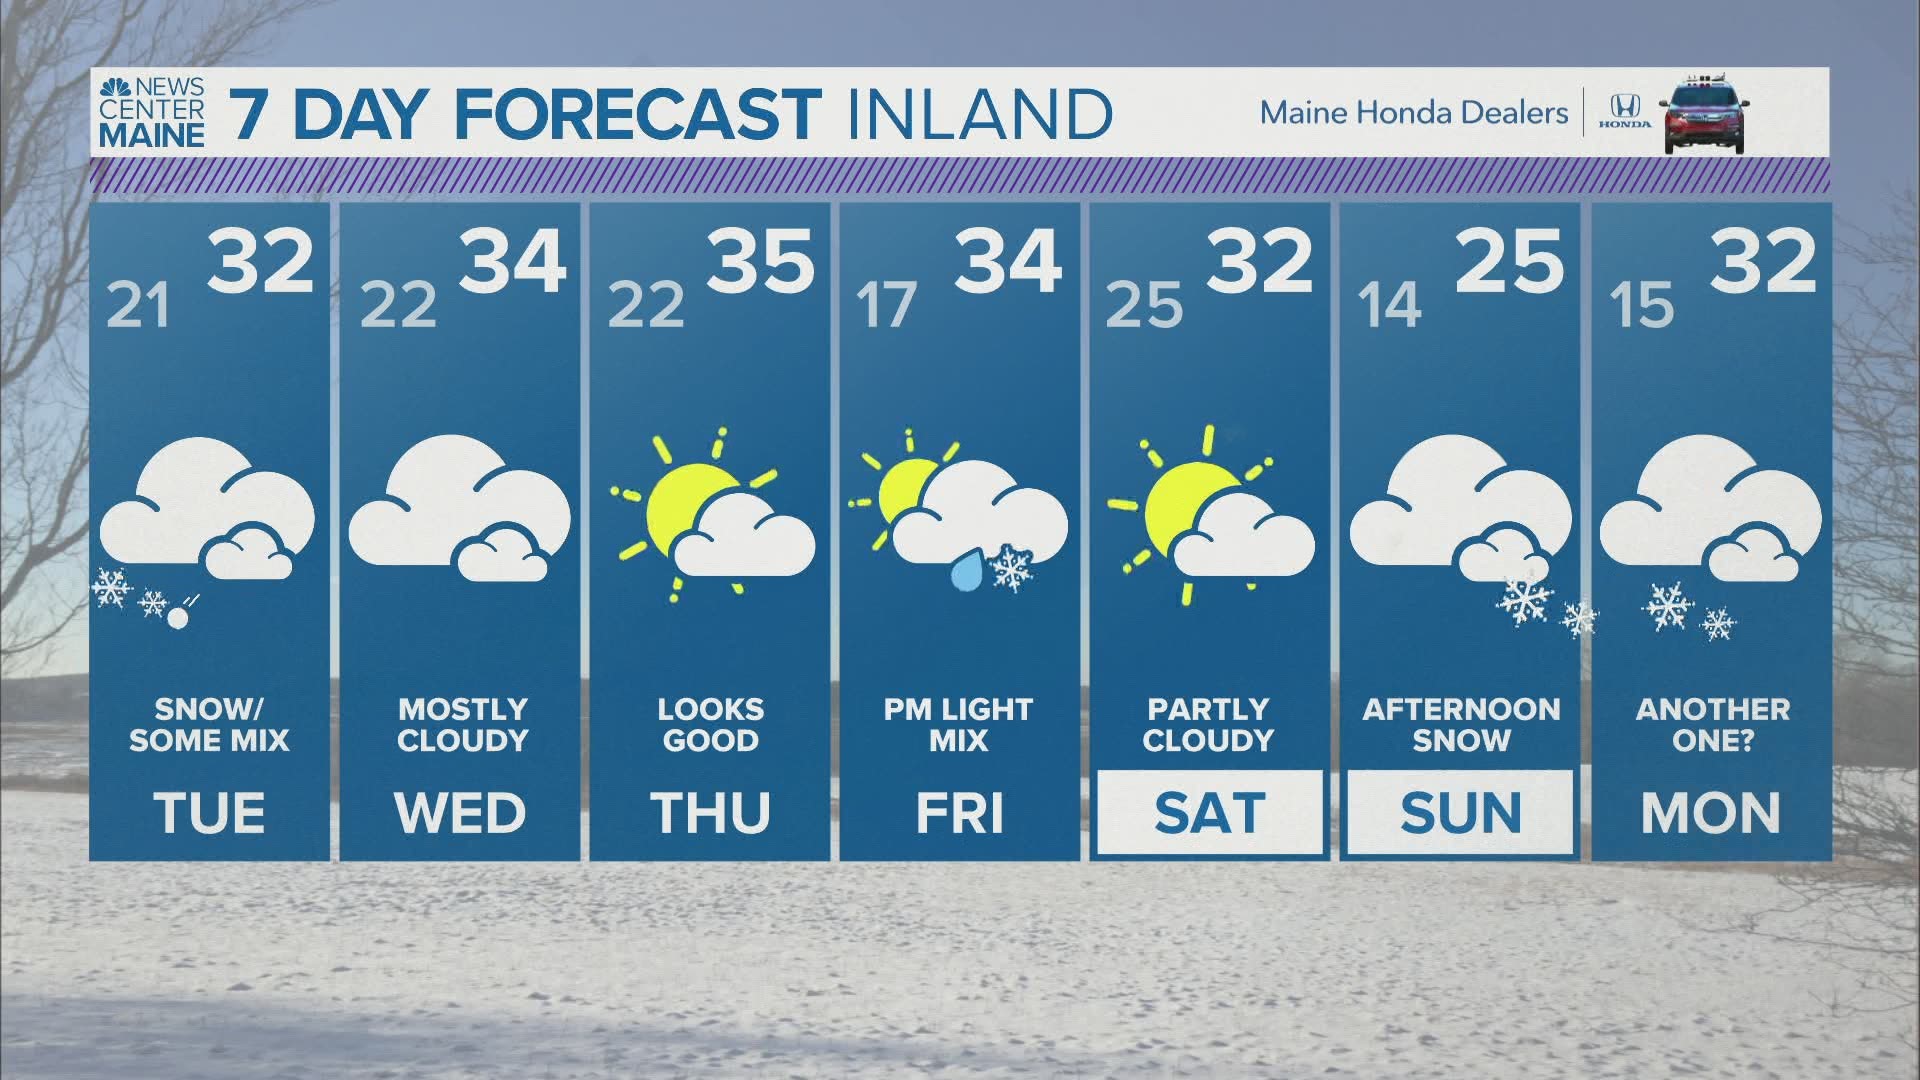 NEWS CENTER Maine Weather Video Forecast UPDATED: Monday February 1, 2021 at 4:00pm.